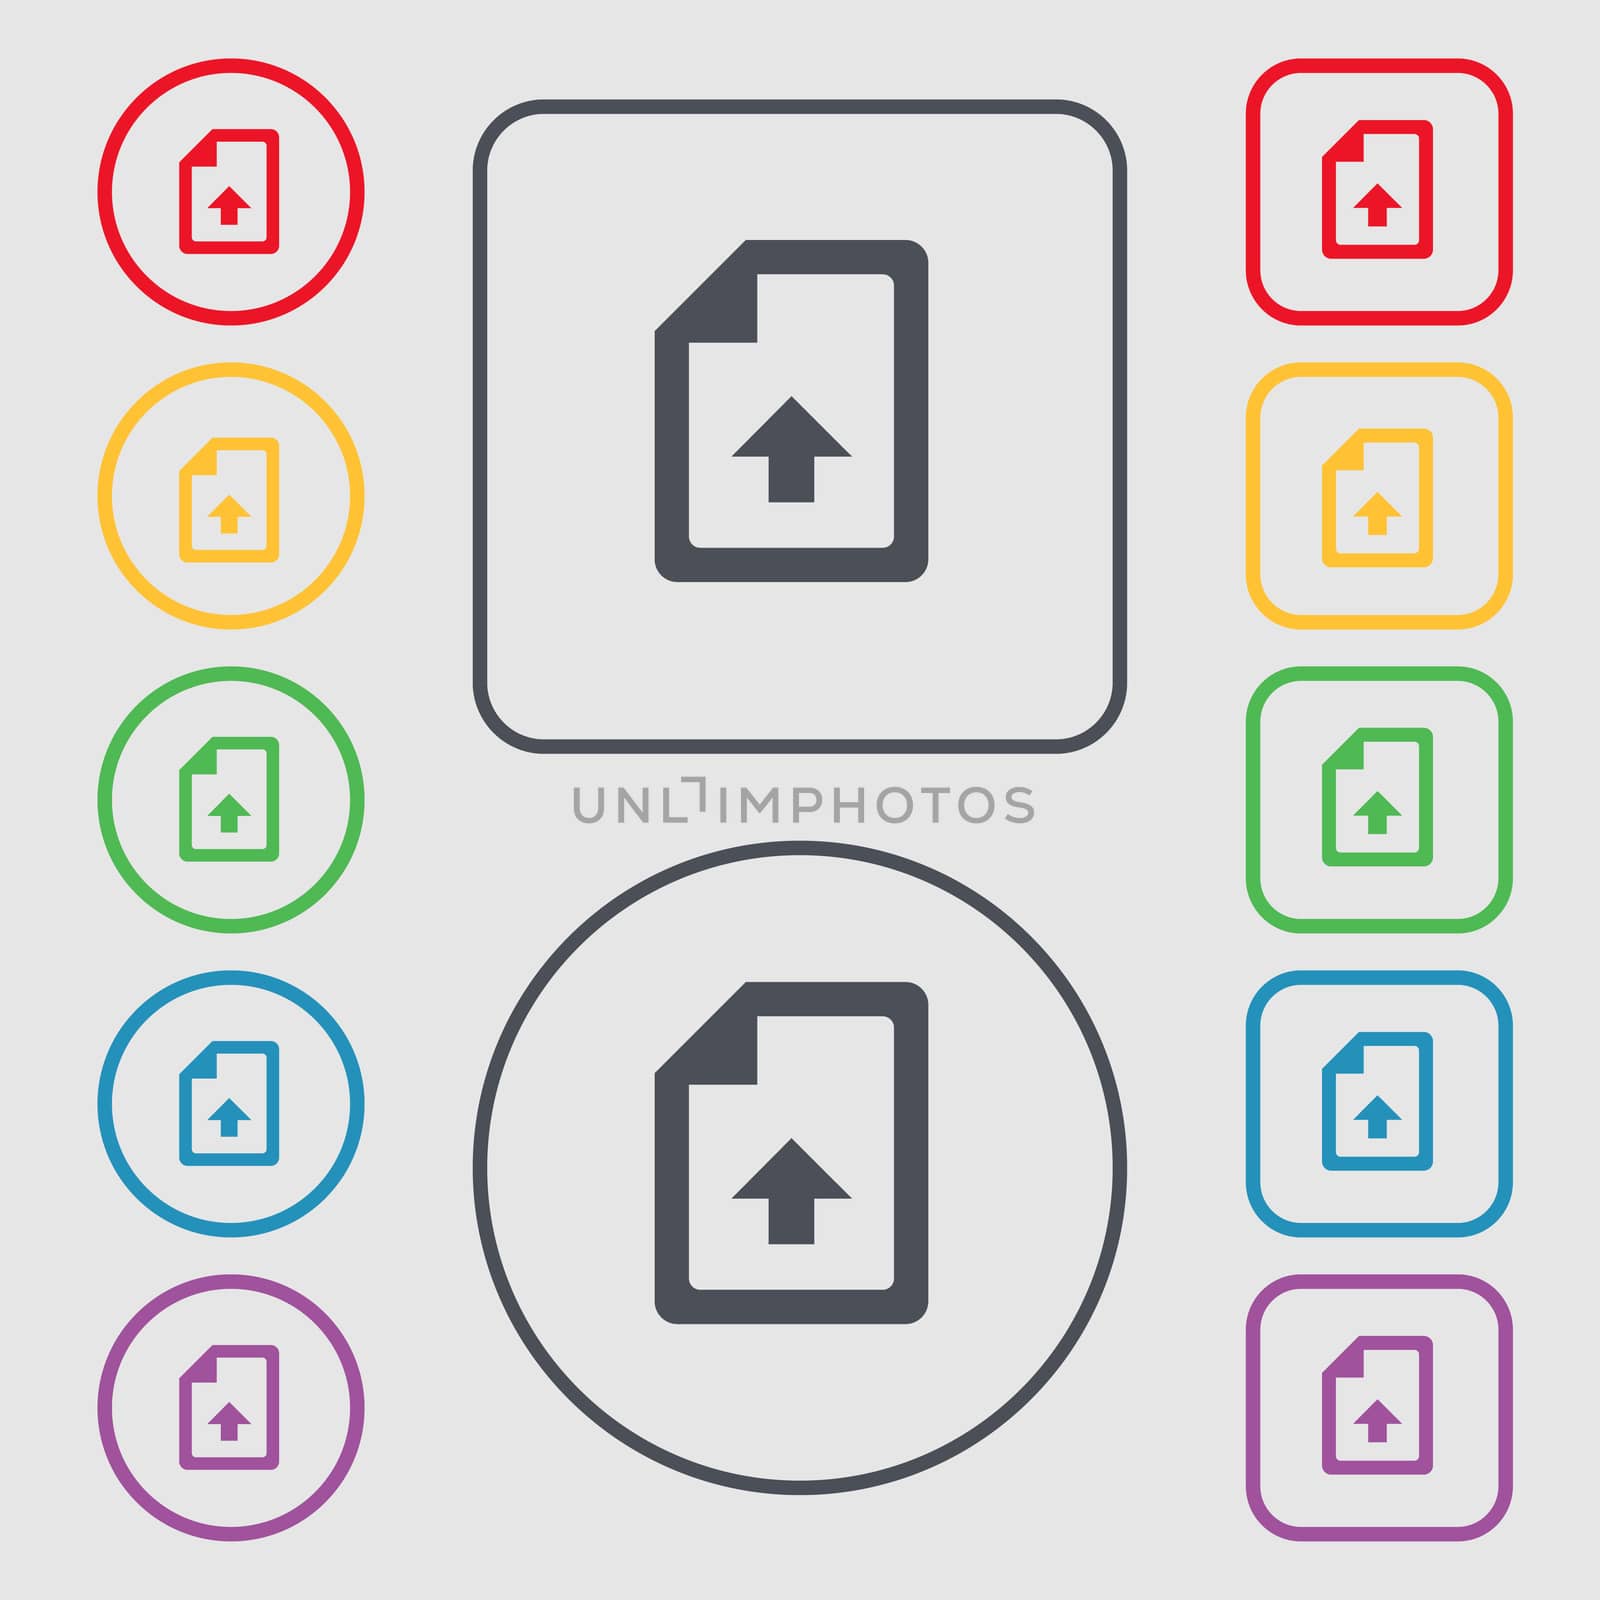 Export, Upload file icon sign. symbol on the Round and square buttons with frame. illustration